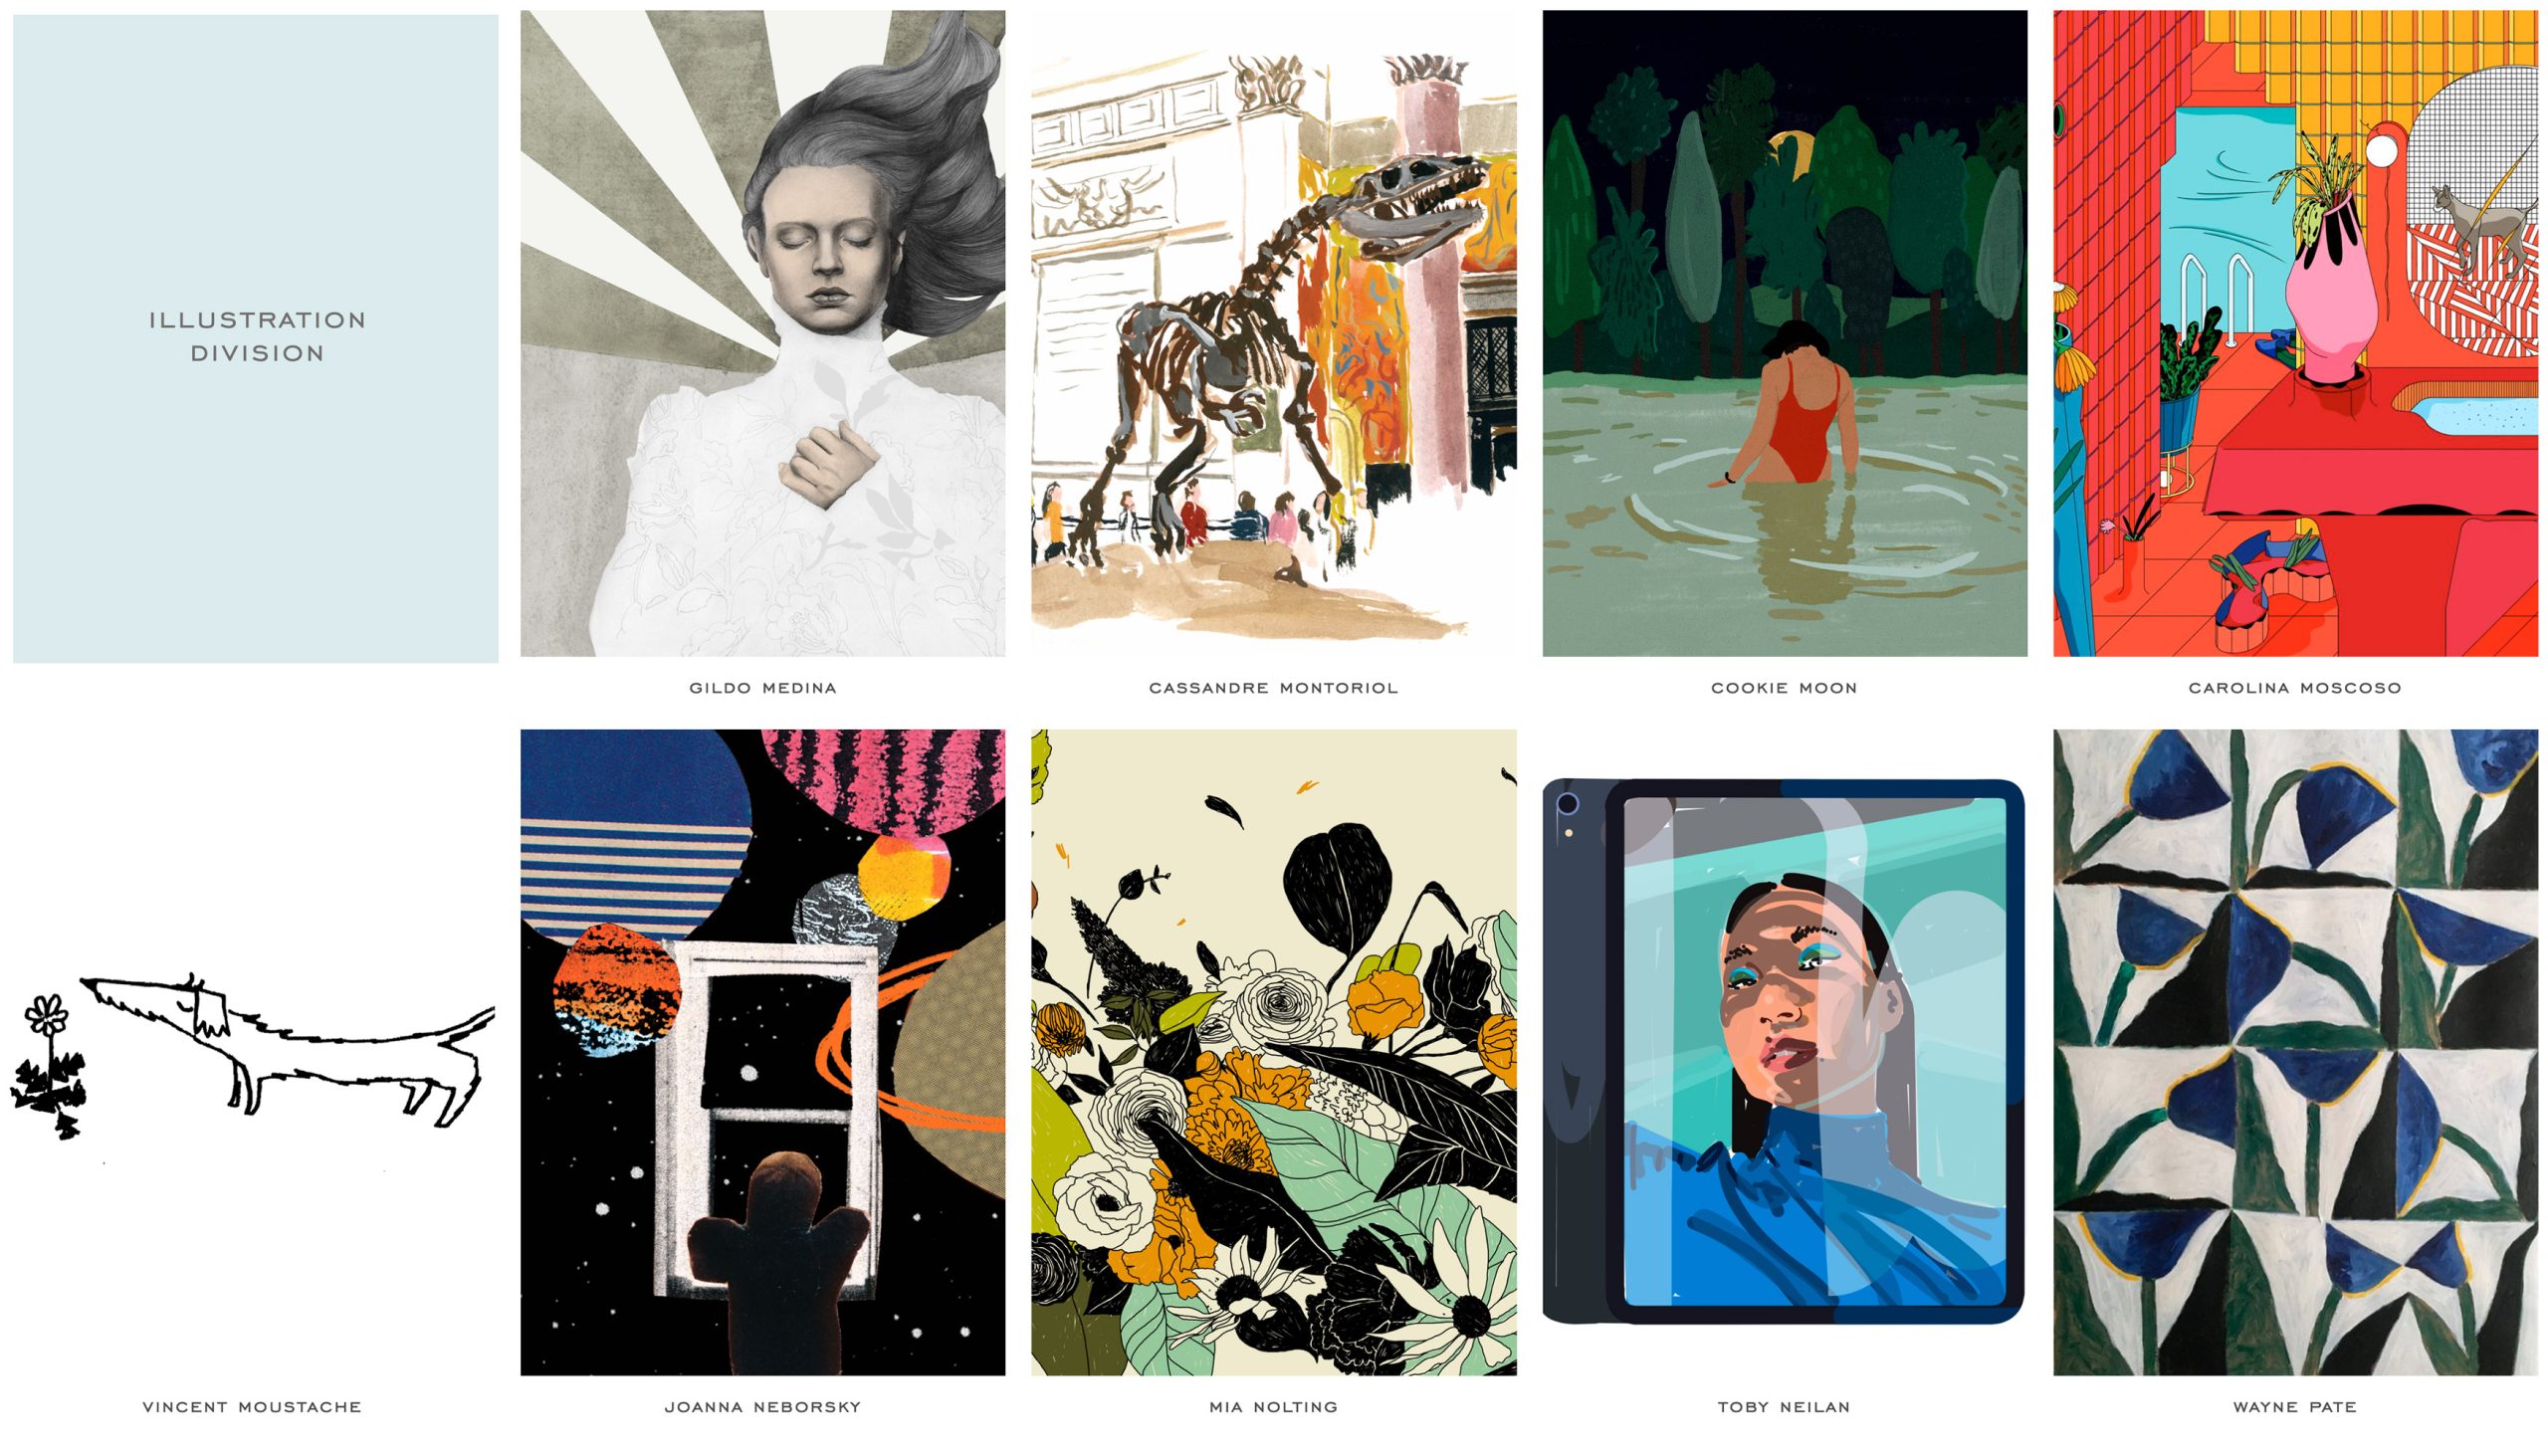 Division is an illustration agency in GB